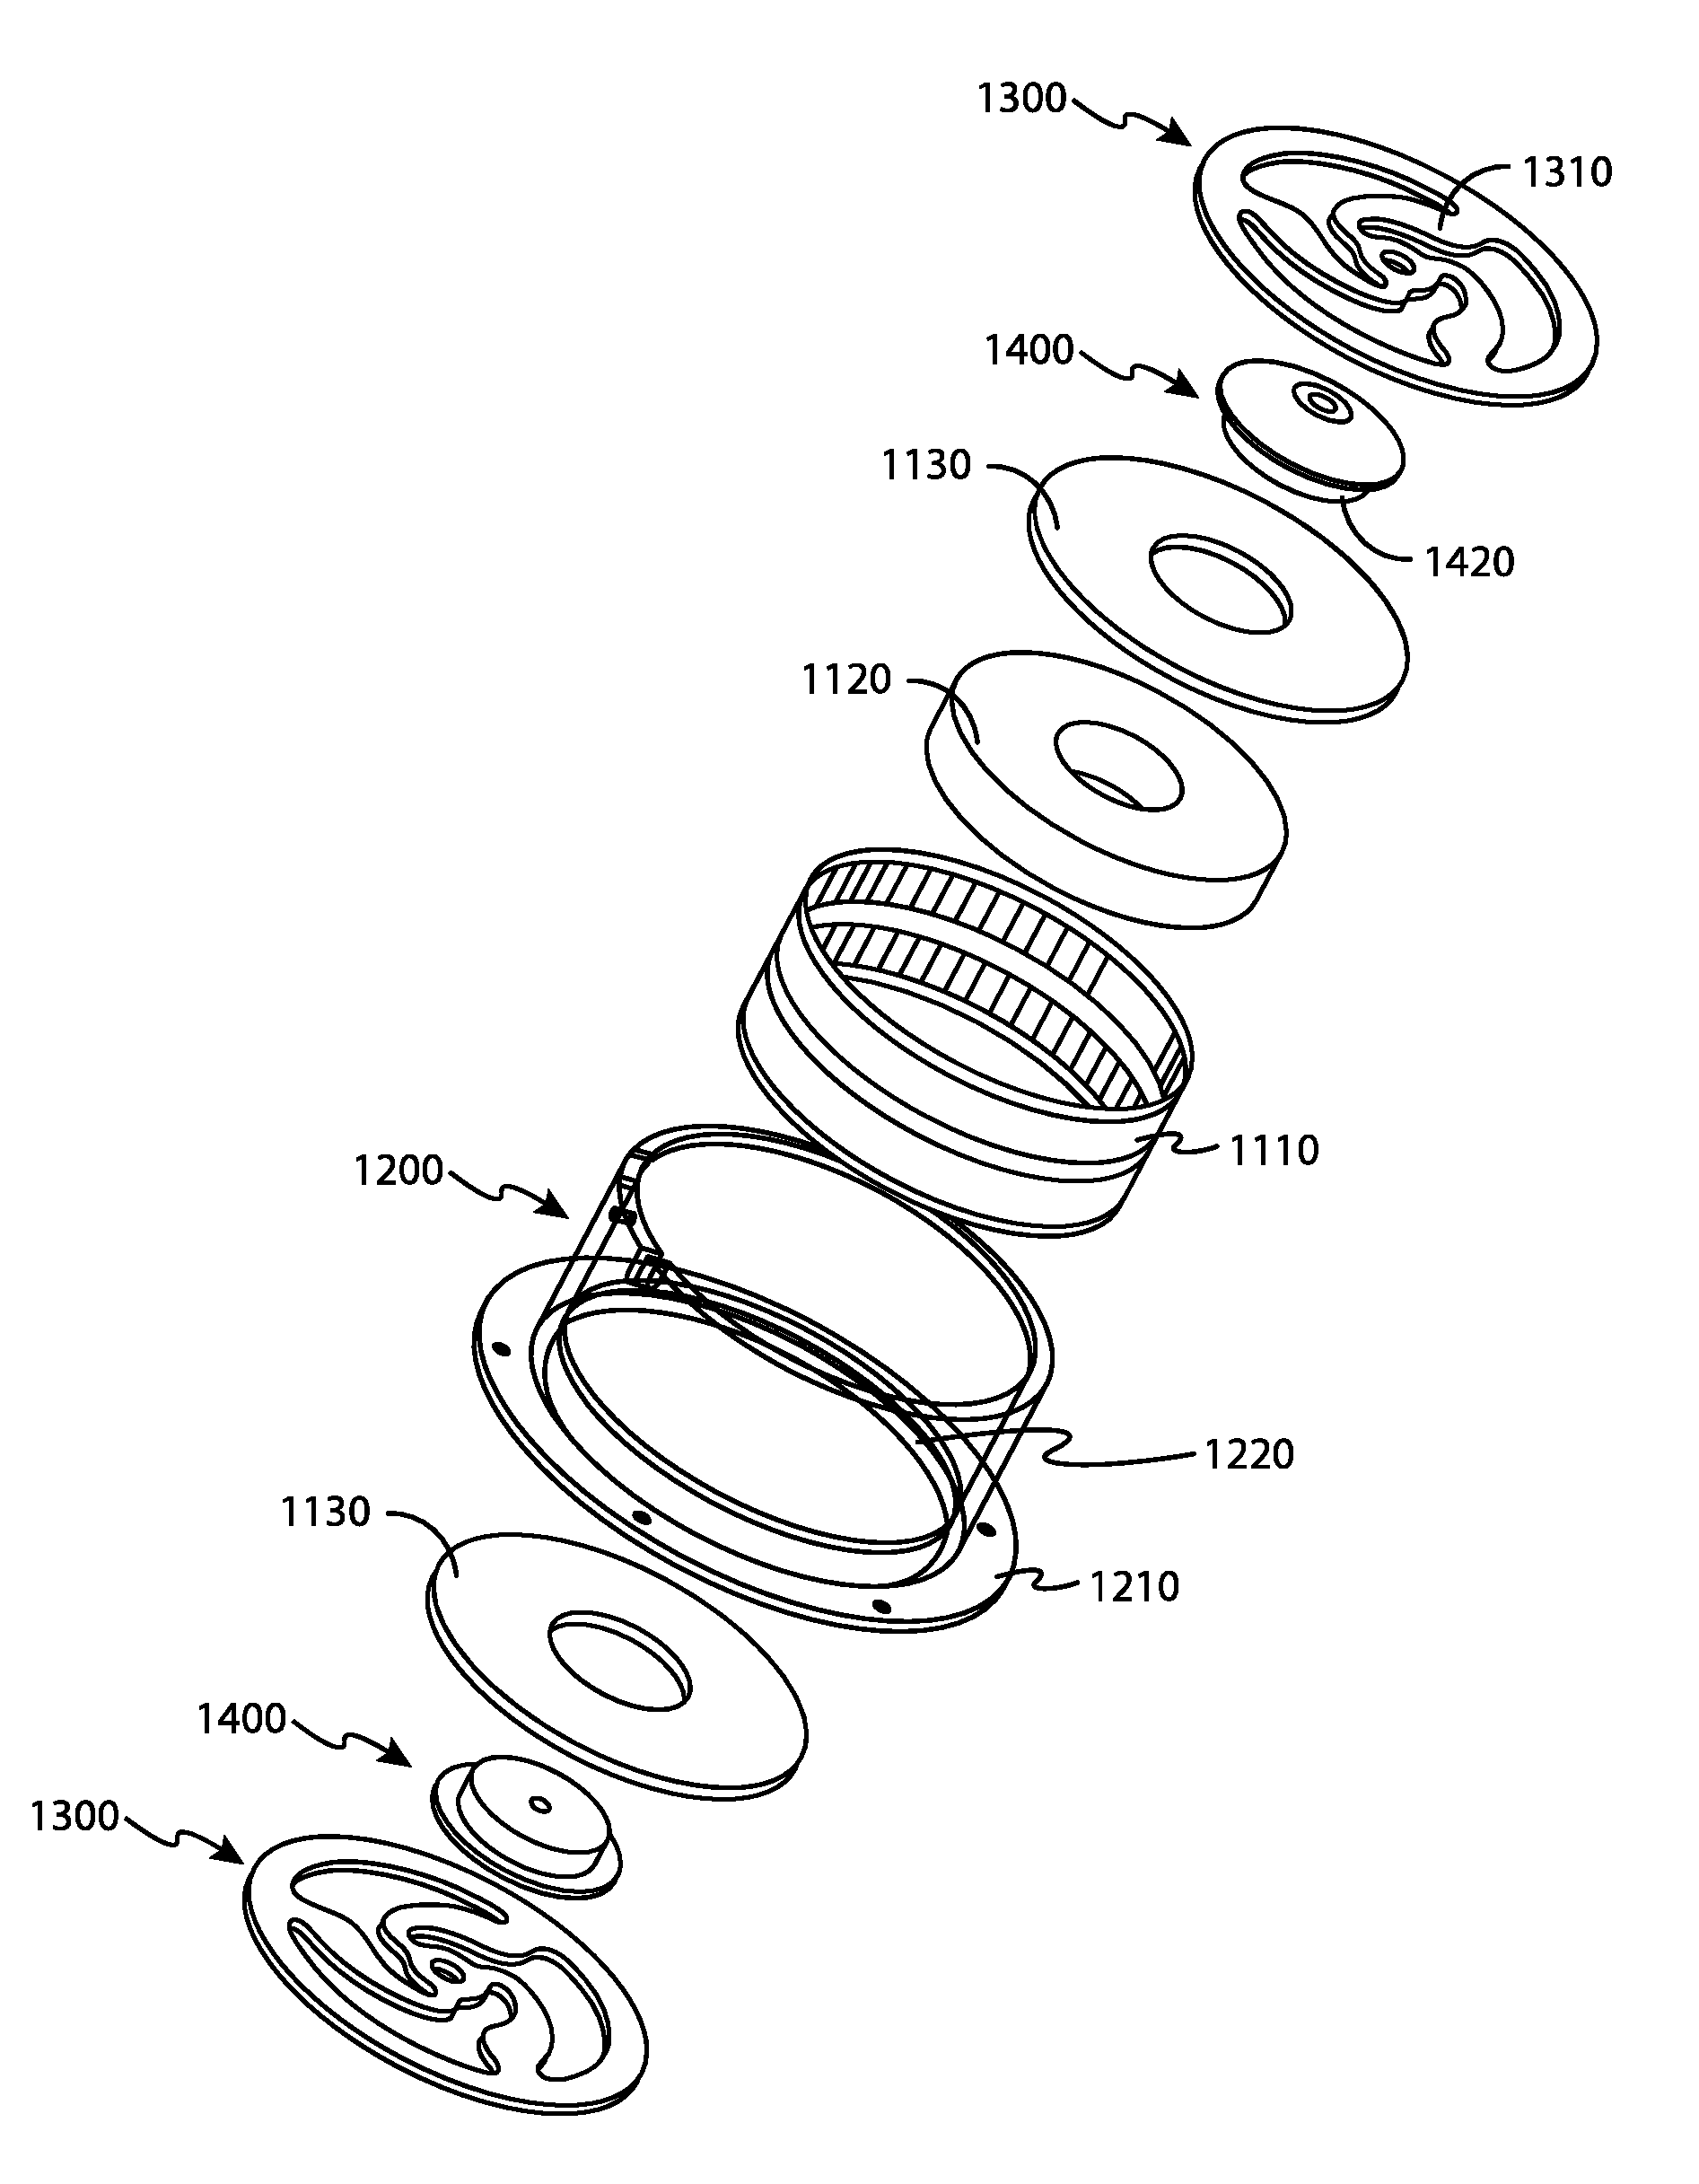 Shaker apparatus and related methods of transmitting vibrational energy to recipients